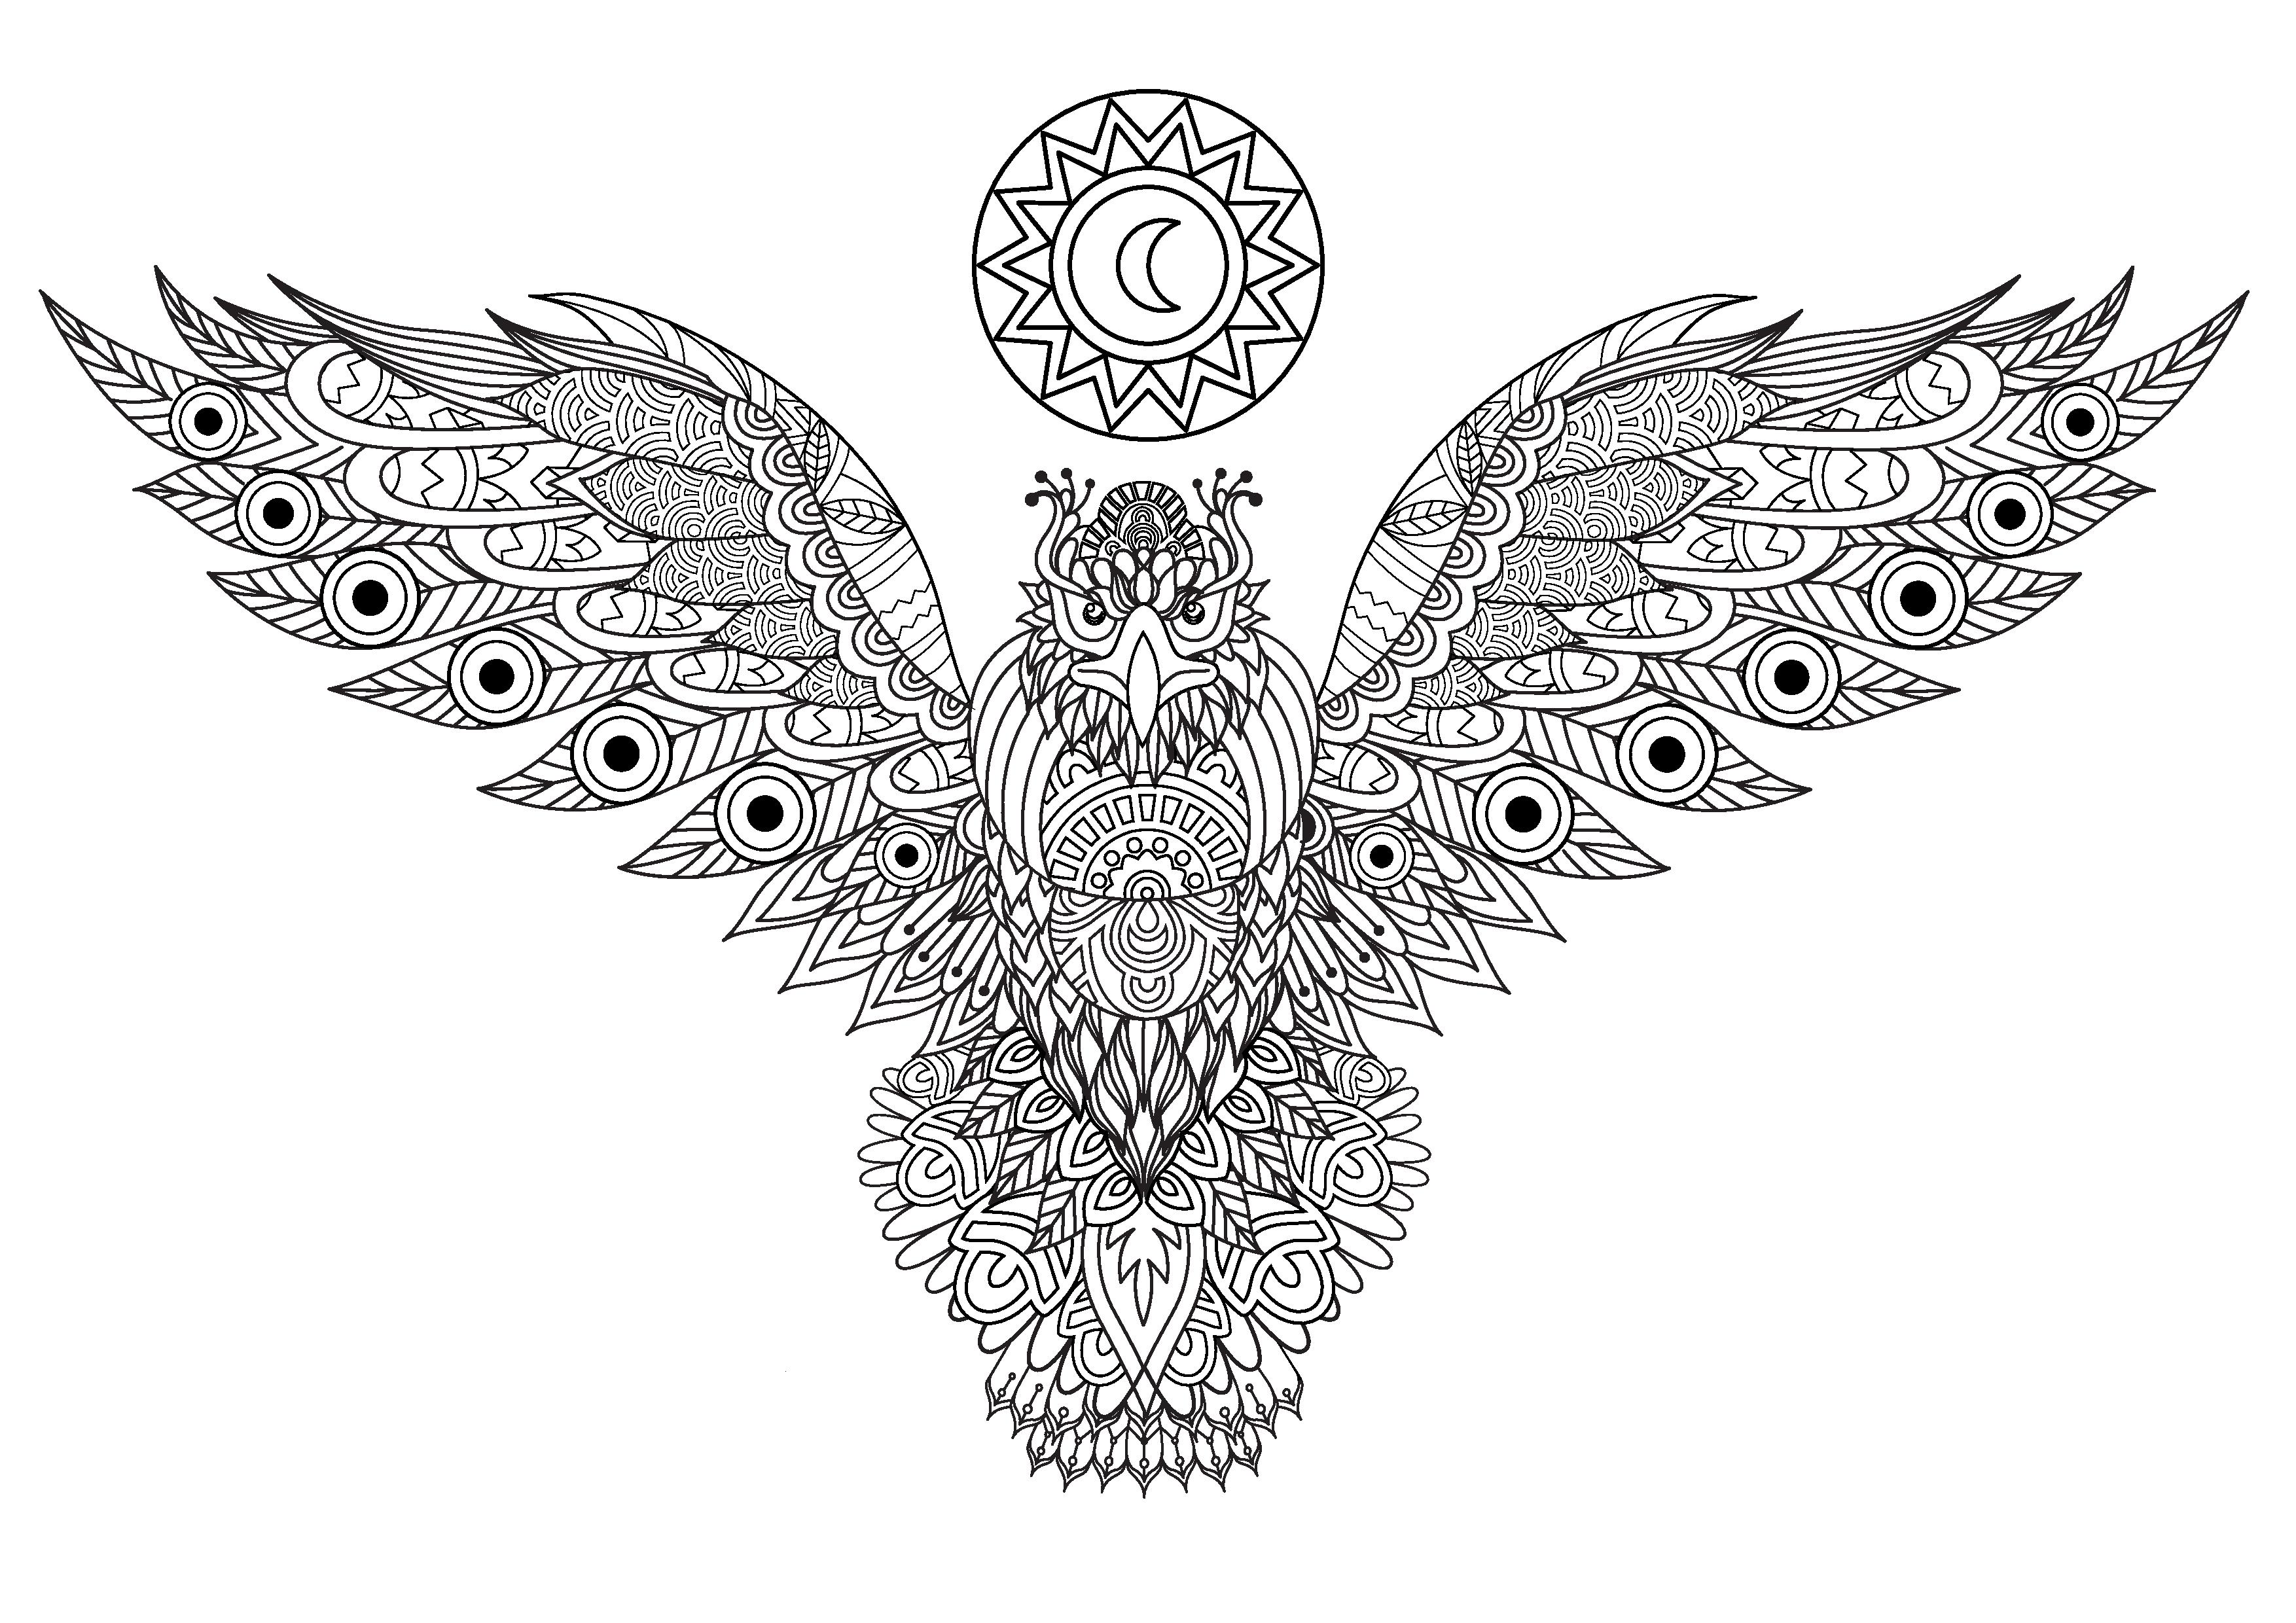 Majestic eagle spreading its wings and featuring many diverse and intricate designs